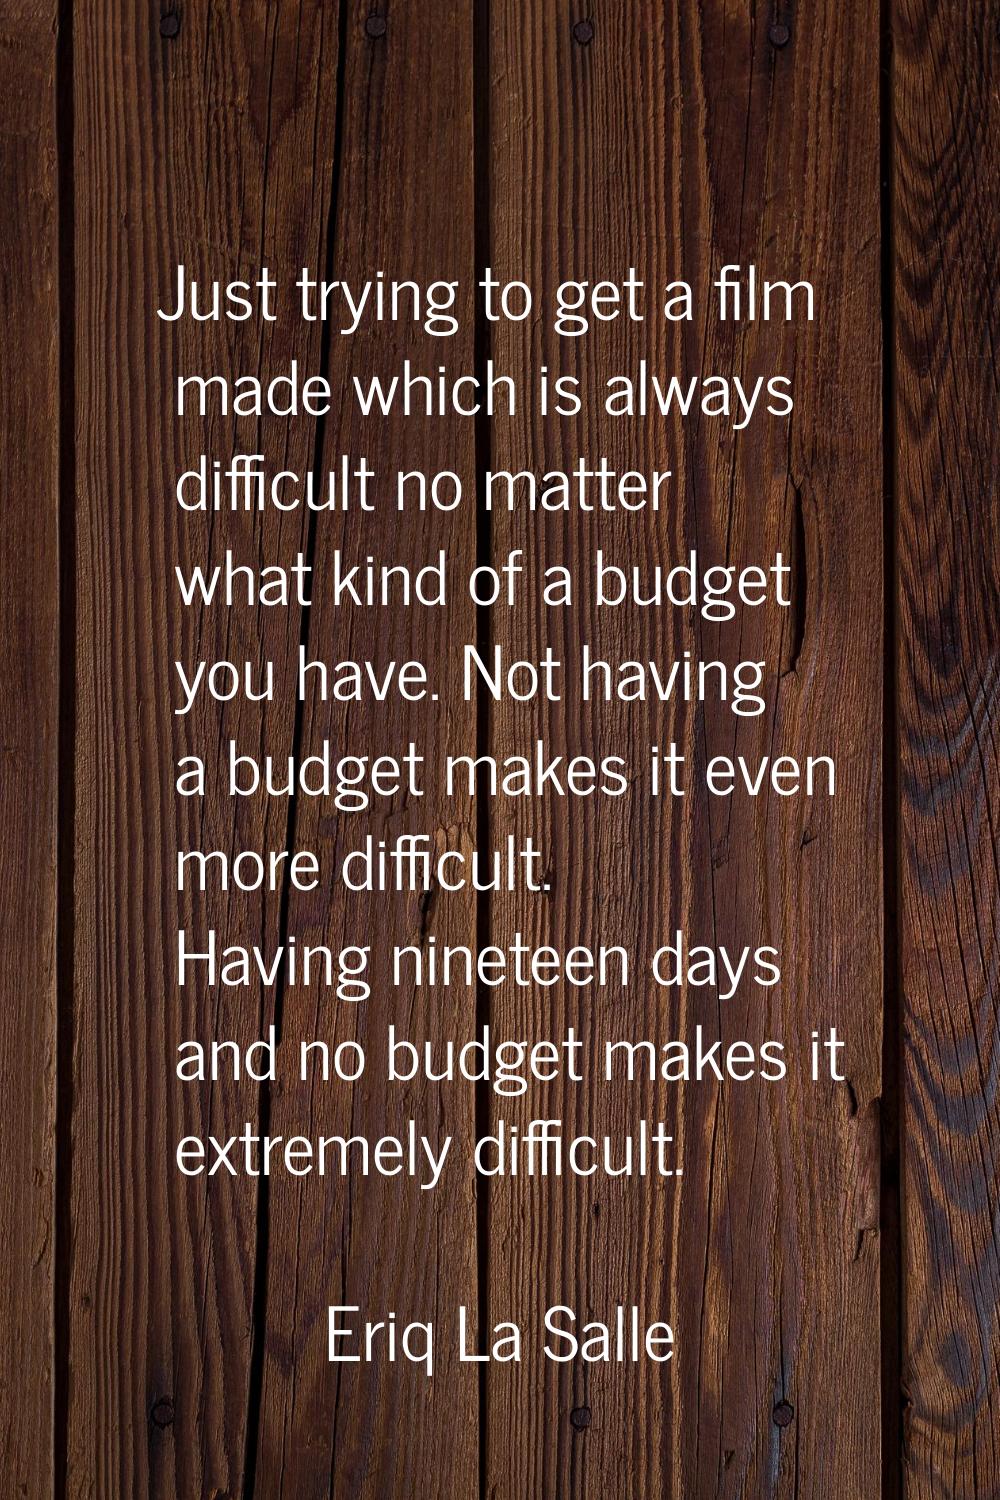 Just trying to get a film made which is always difficult no matter what kind of a budget you have. 